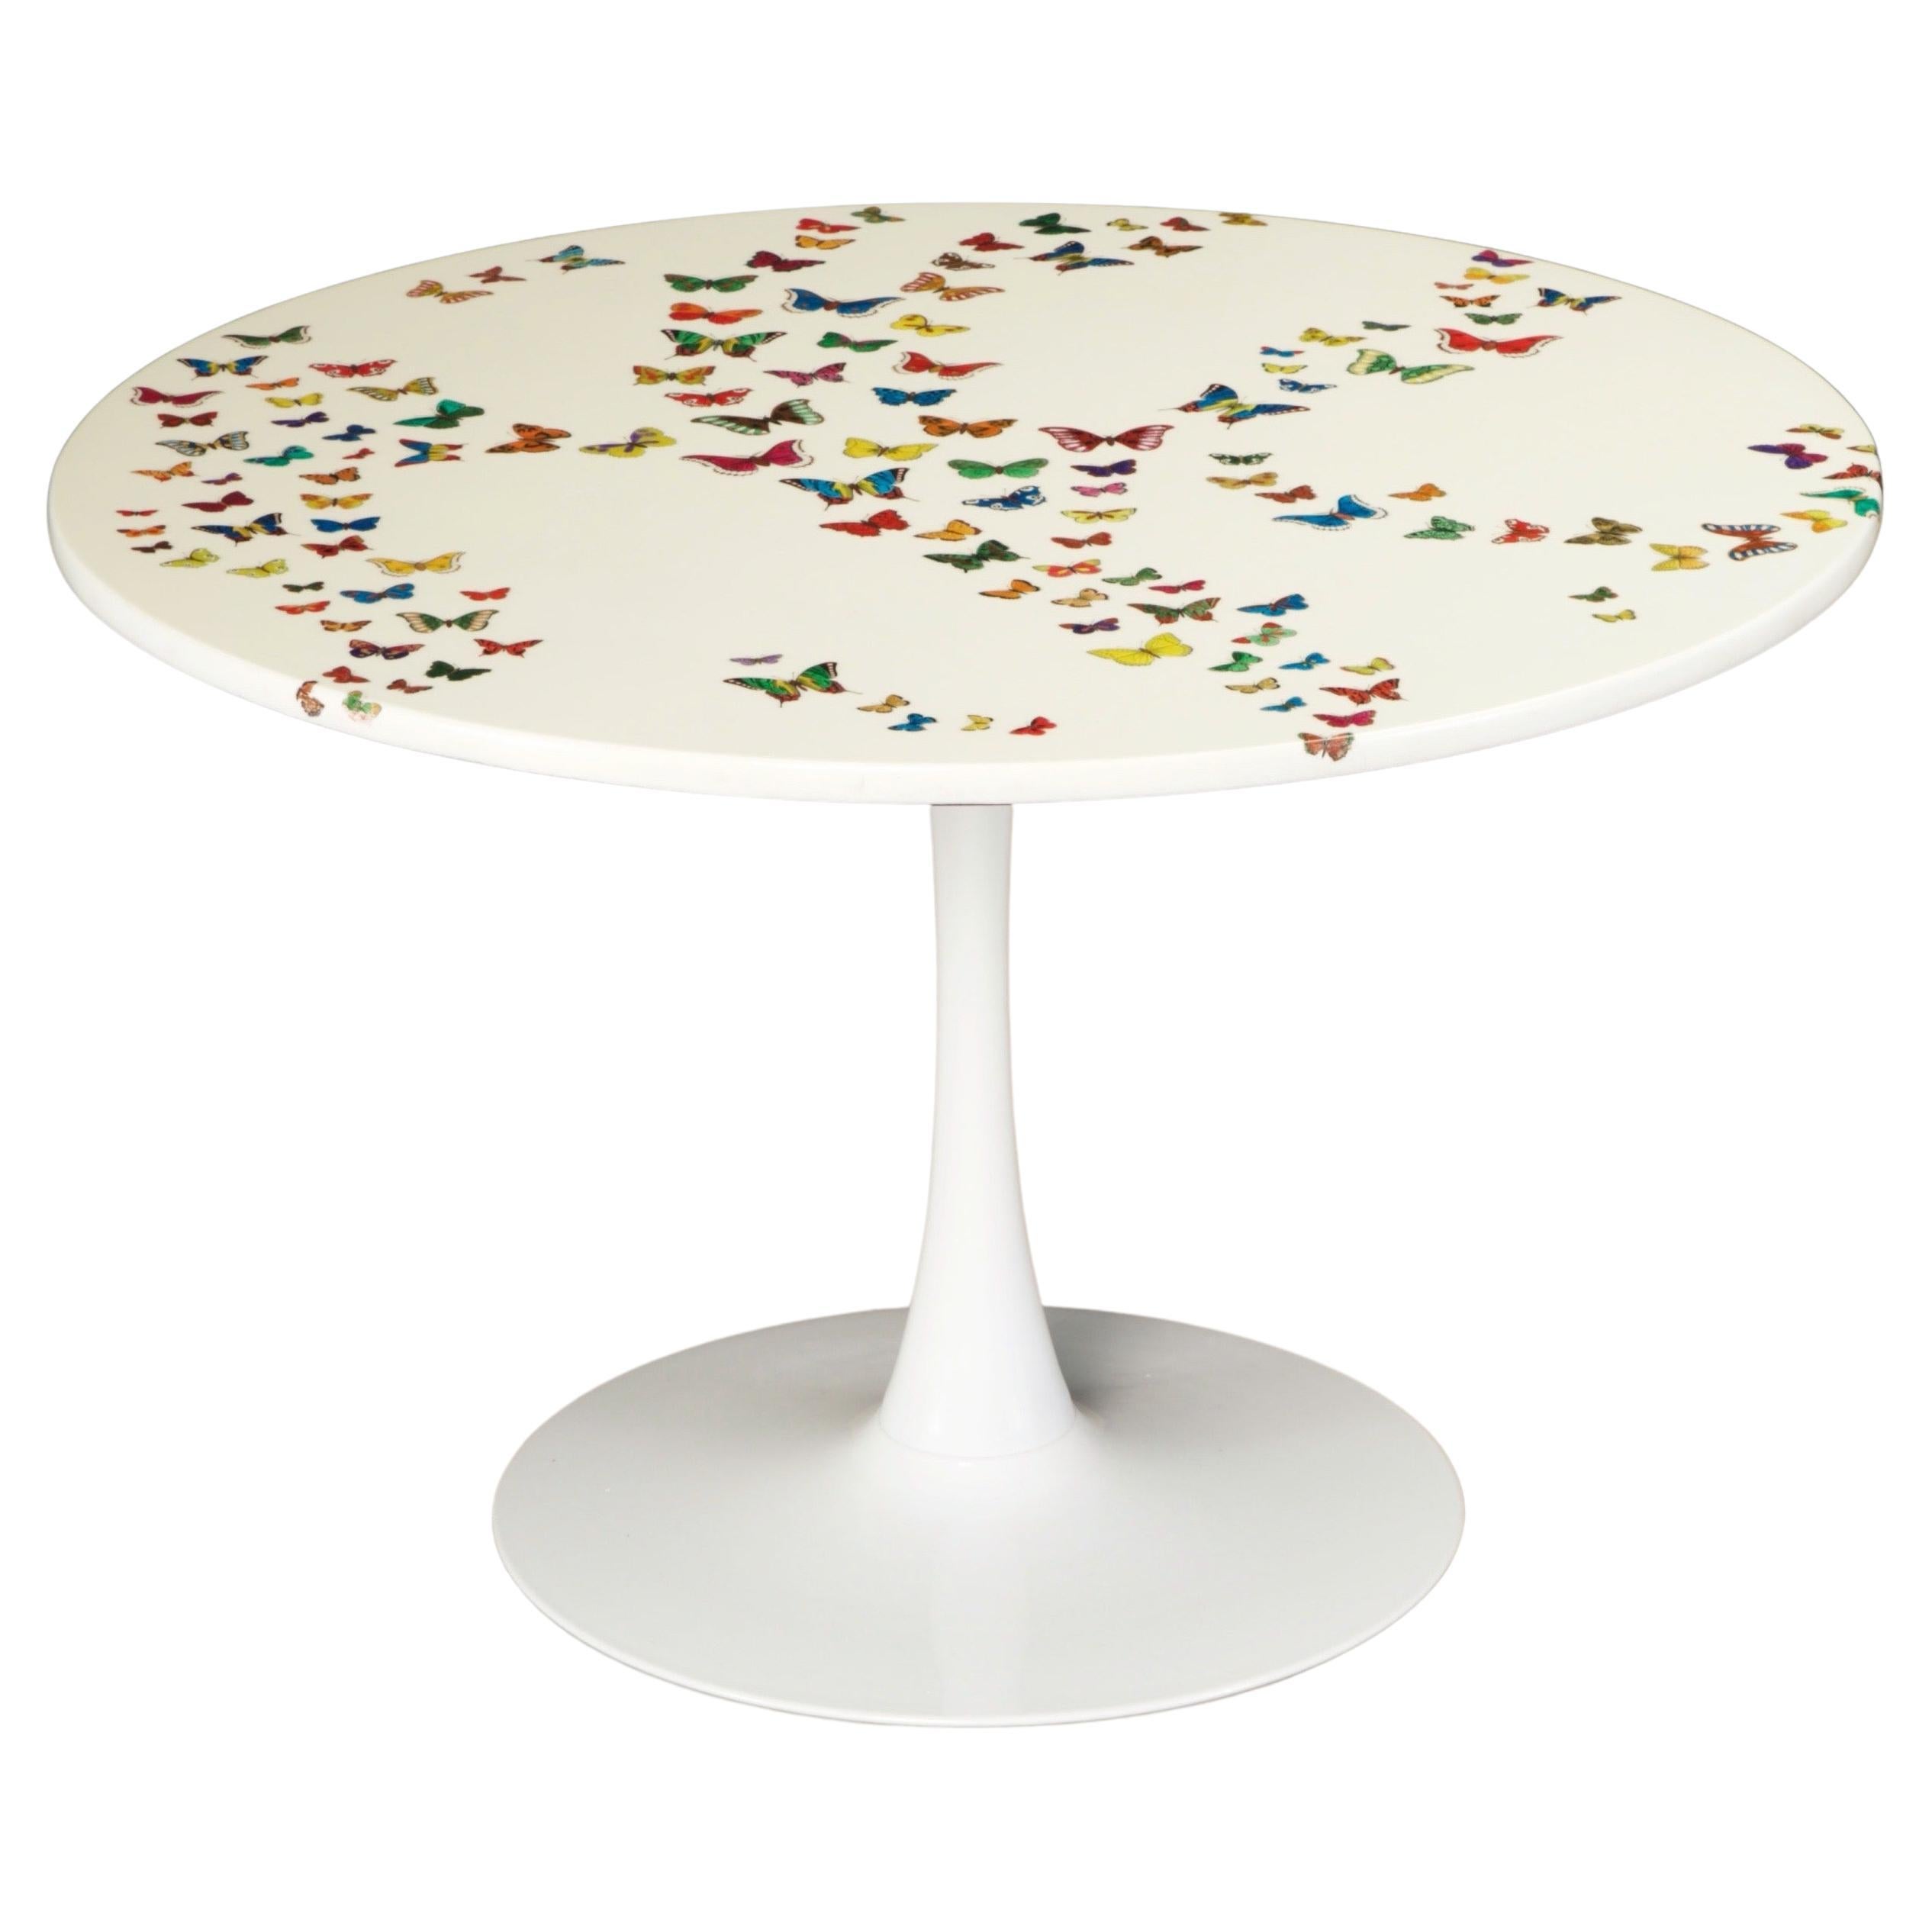 'Butterflies' Dining Table by Piero Fornasetti, circa 1970s Italy, Signed  For Sale